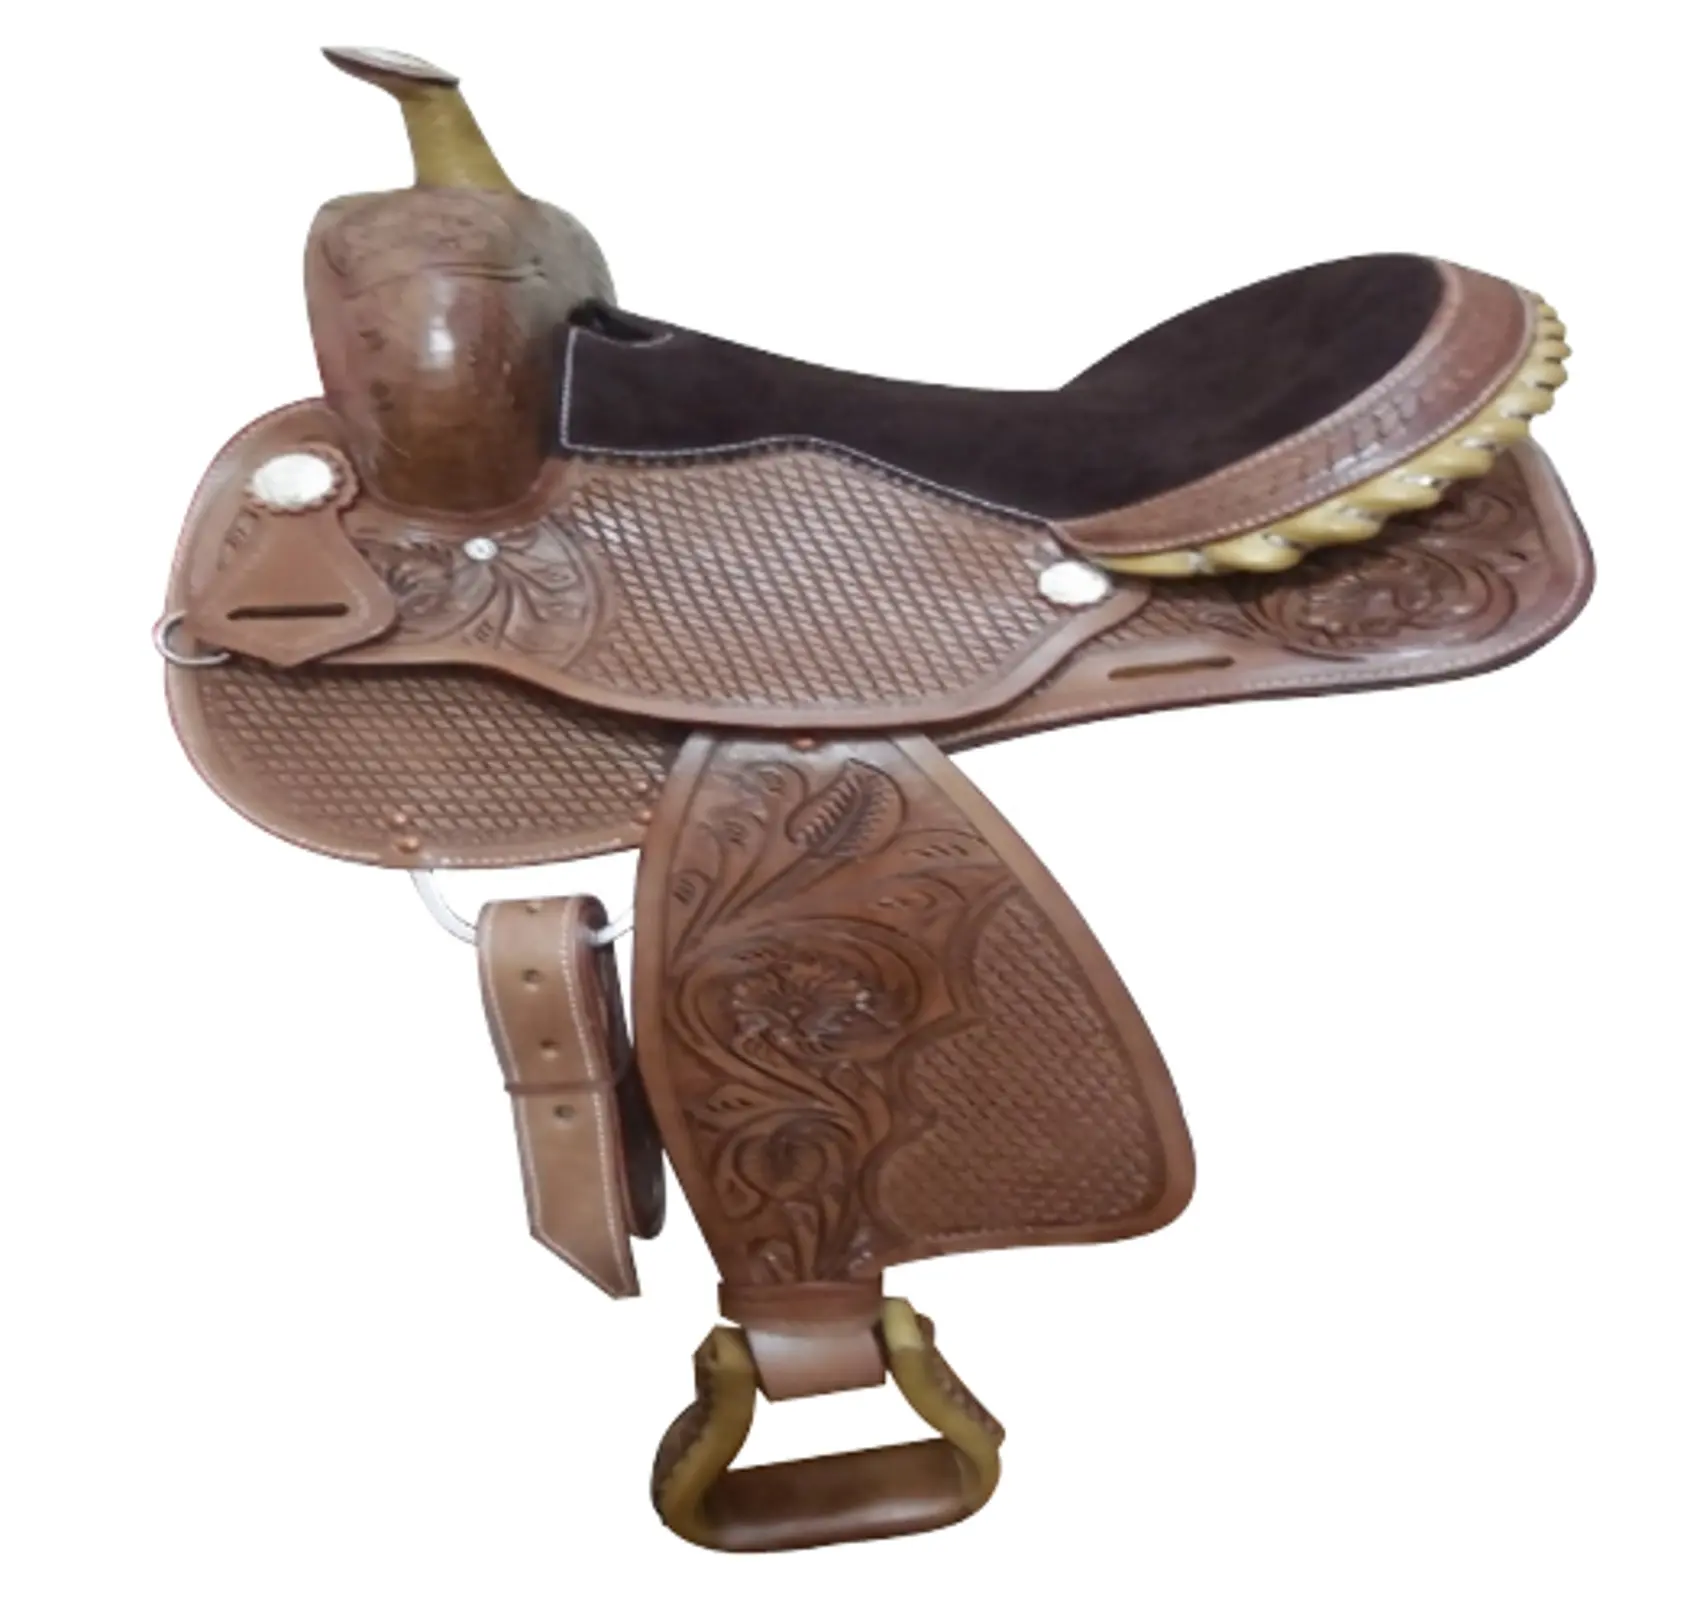 100 % Hand Made Western Barrel Leather Horse Saddle With Fiber Glass Tree And Smart Rawhide Stirrups Available In 15 To 16 Inch